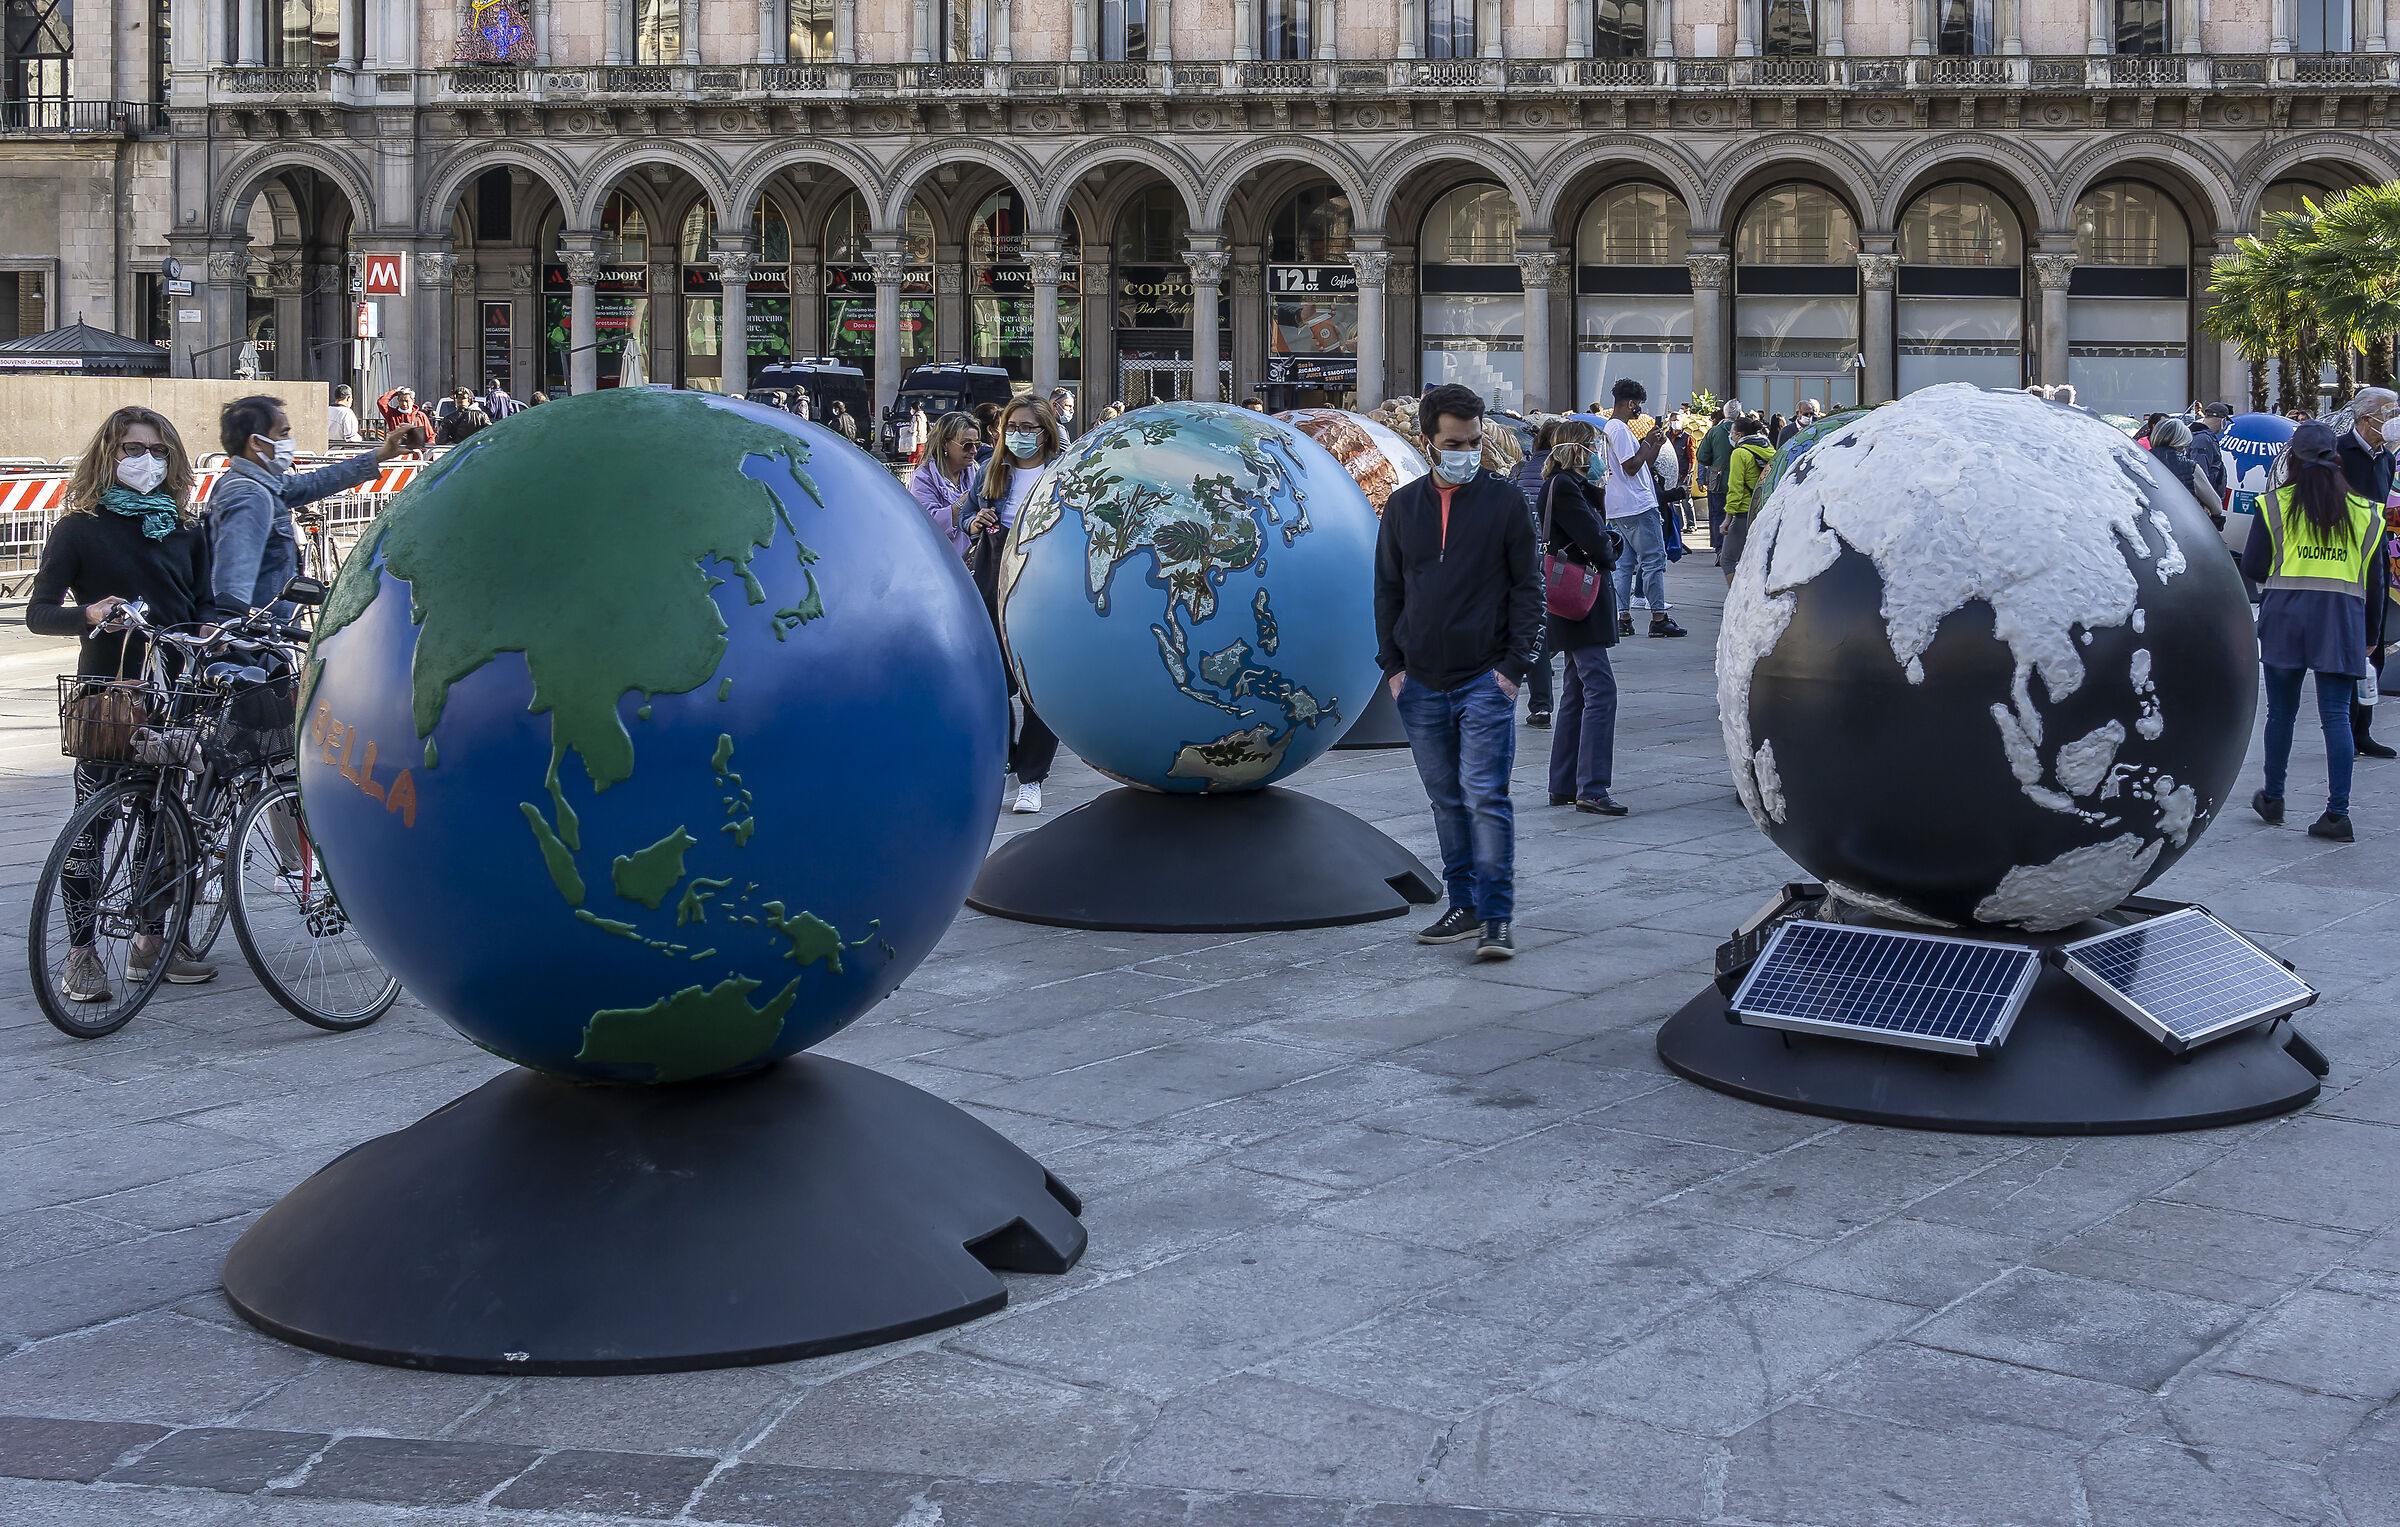 WePlanet - Easter 2021 in Piazza del Duomo. 16:18:12...